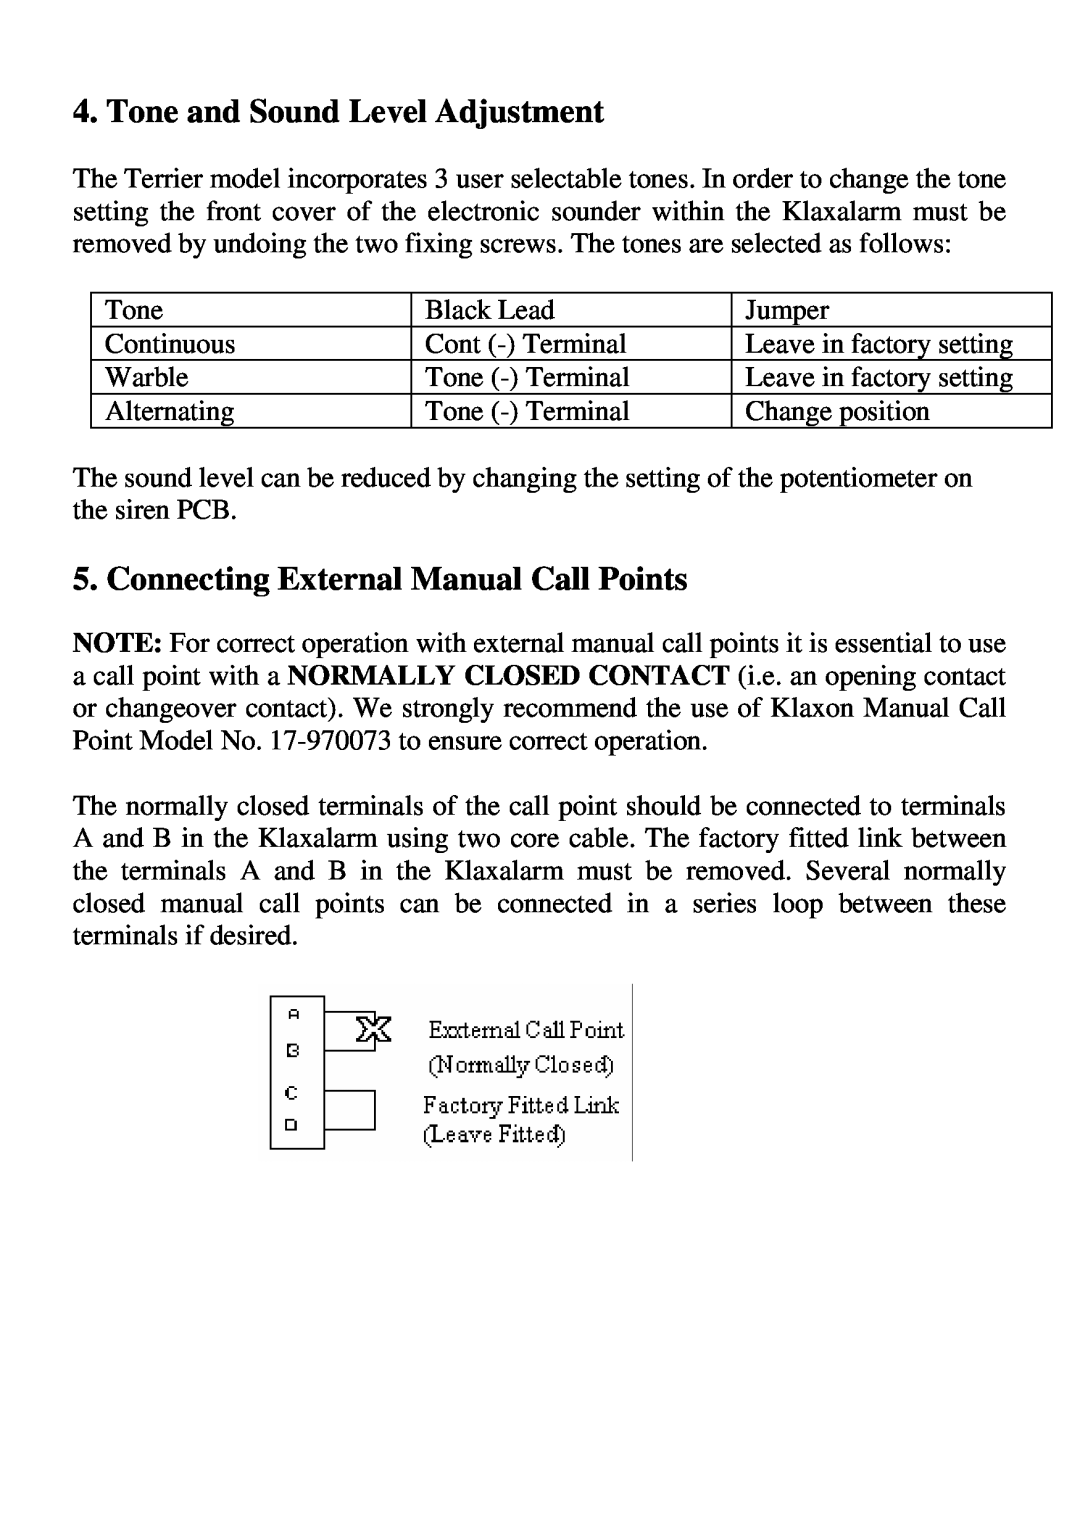 Klaxon 18-980181 installation instructions Tone and Sound Level Adjustment, Connecting External Manual Call Points 